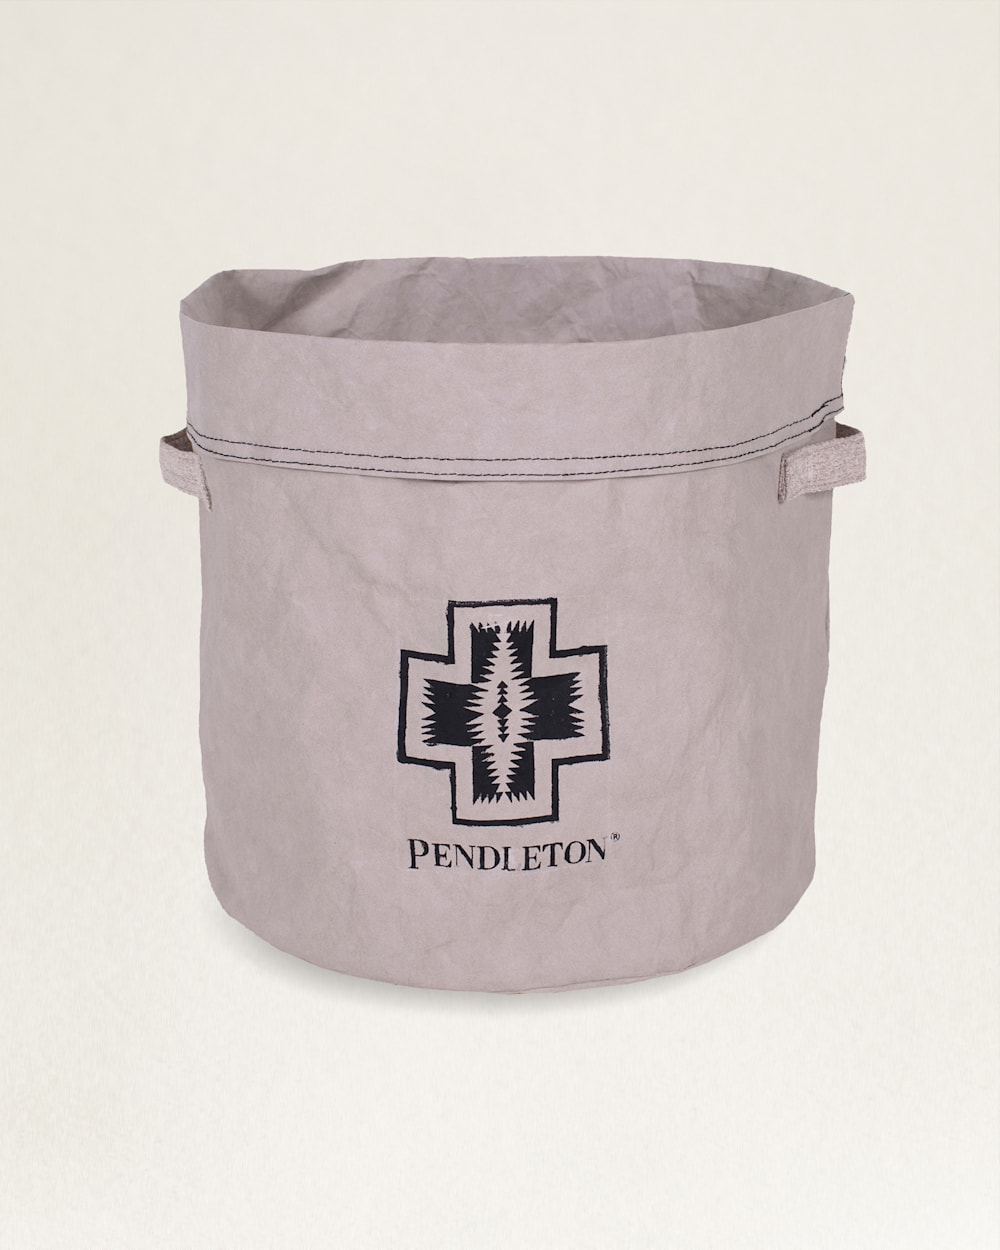 ALTERNATE VIEW OF TOY BUCKET IN GREY image number 2